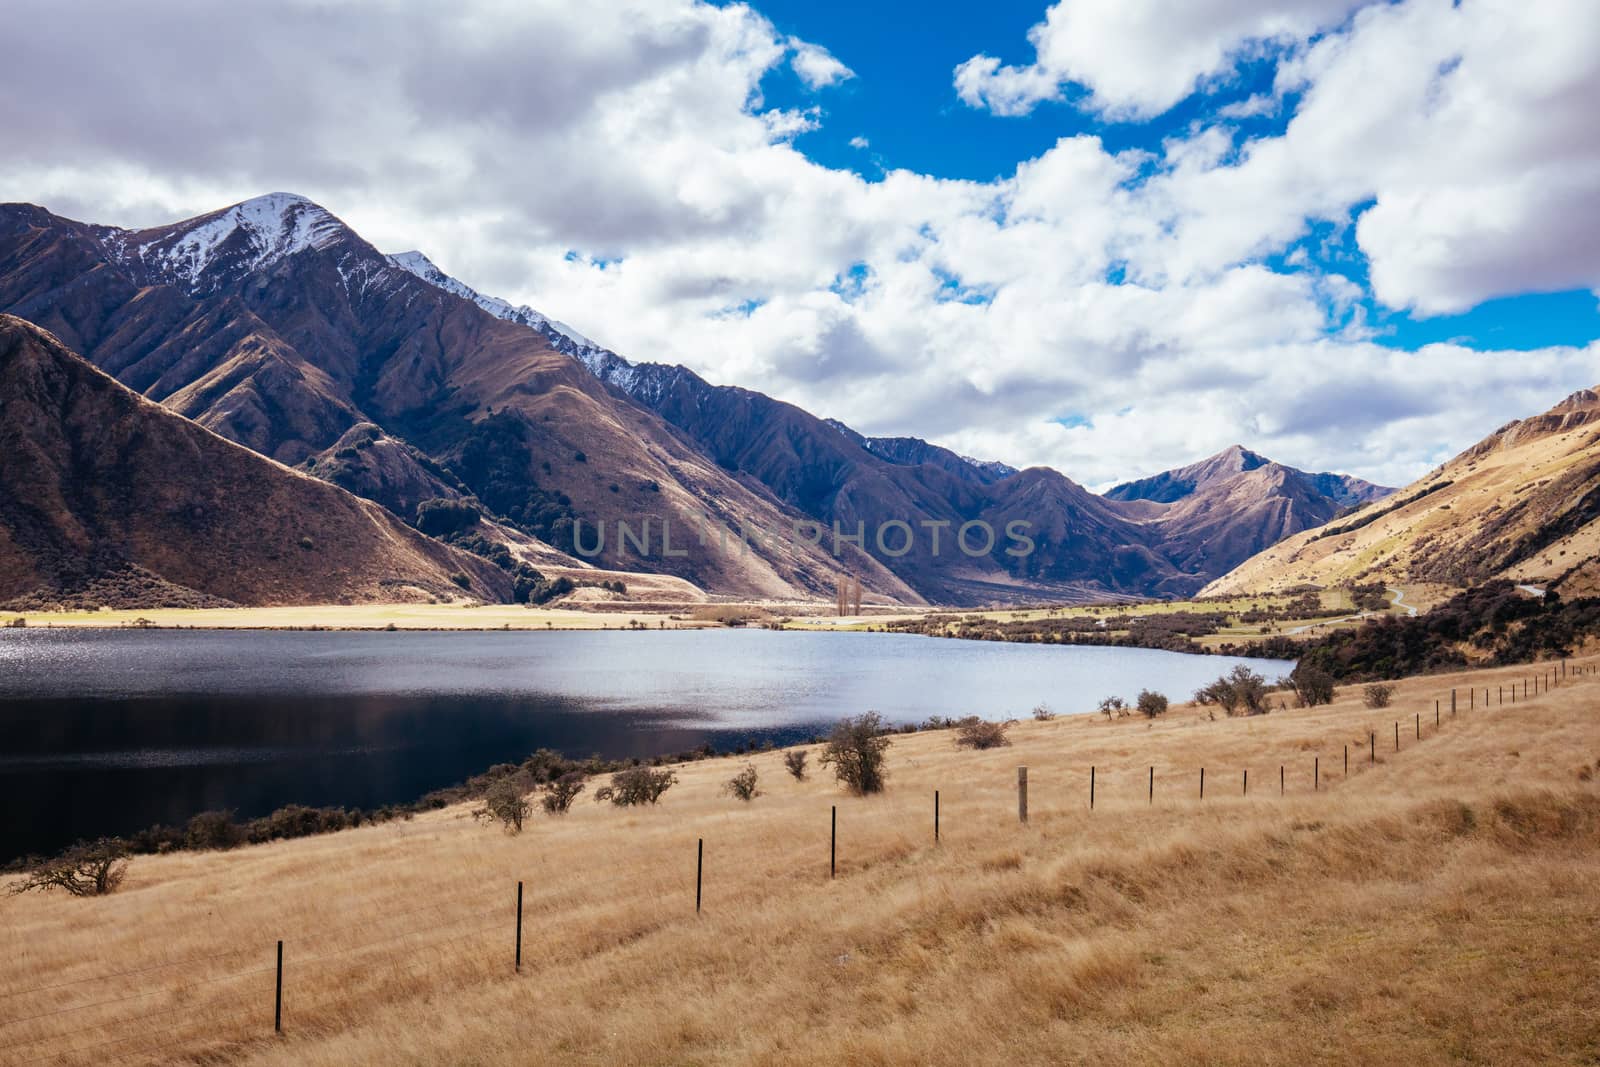 The stunning idyllic Moke Lake near Queenstown in Otago, New Zealand. This secluded, peaceful lake is a popular locale for camping, boating, hiking and horseback riding.